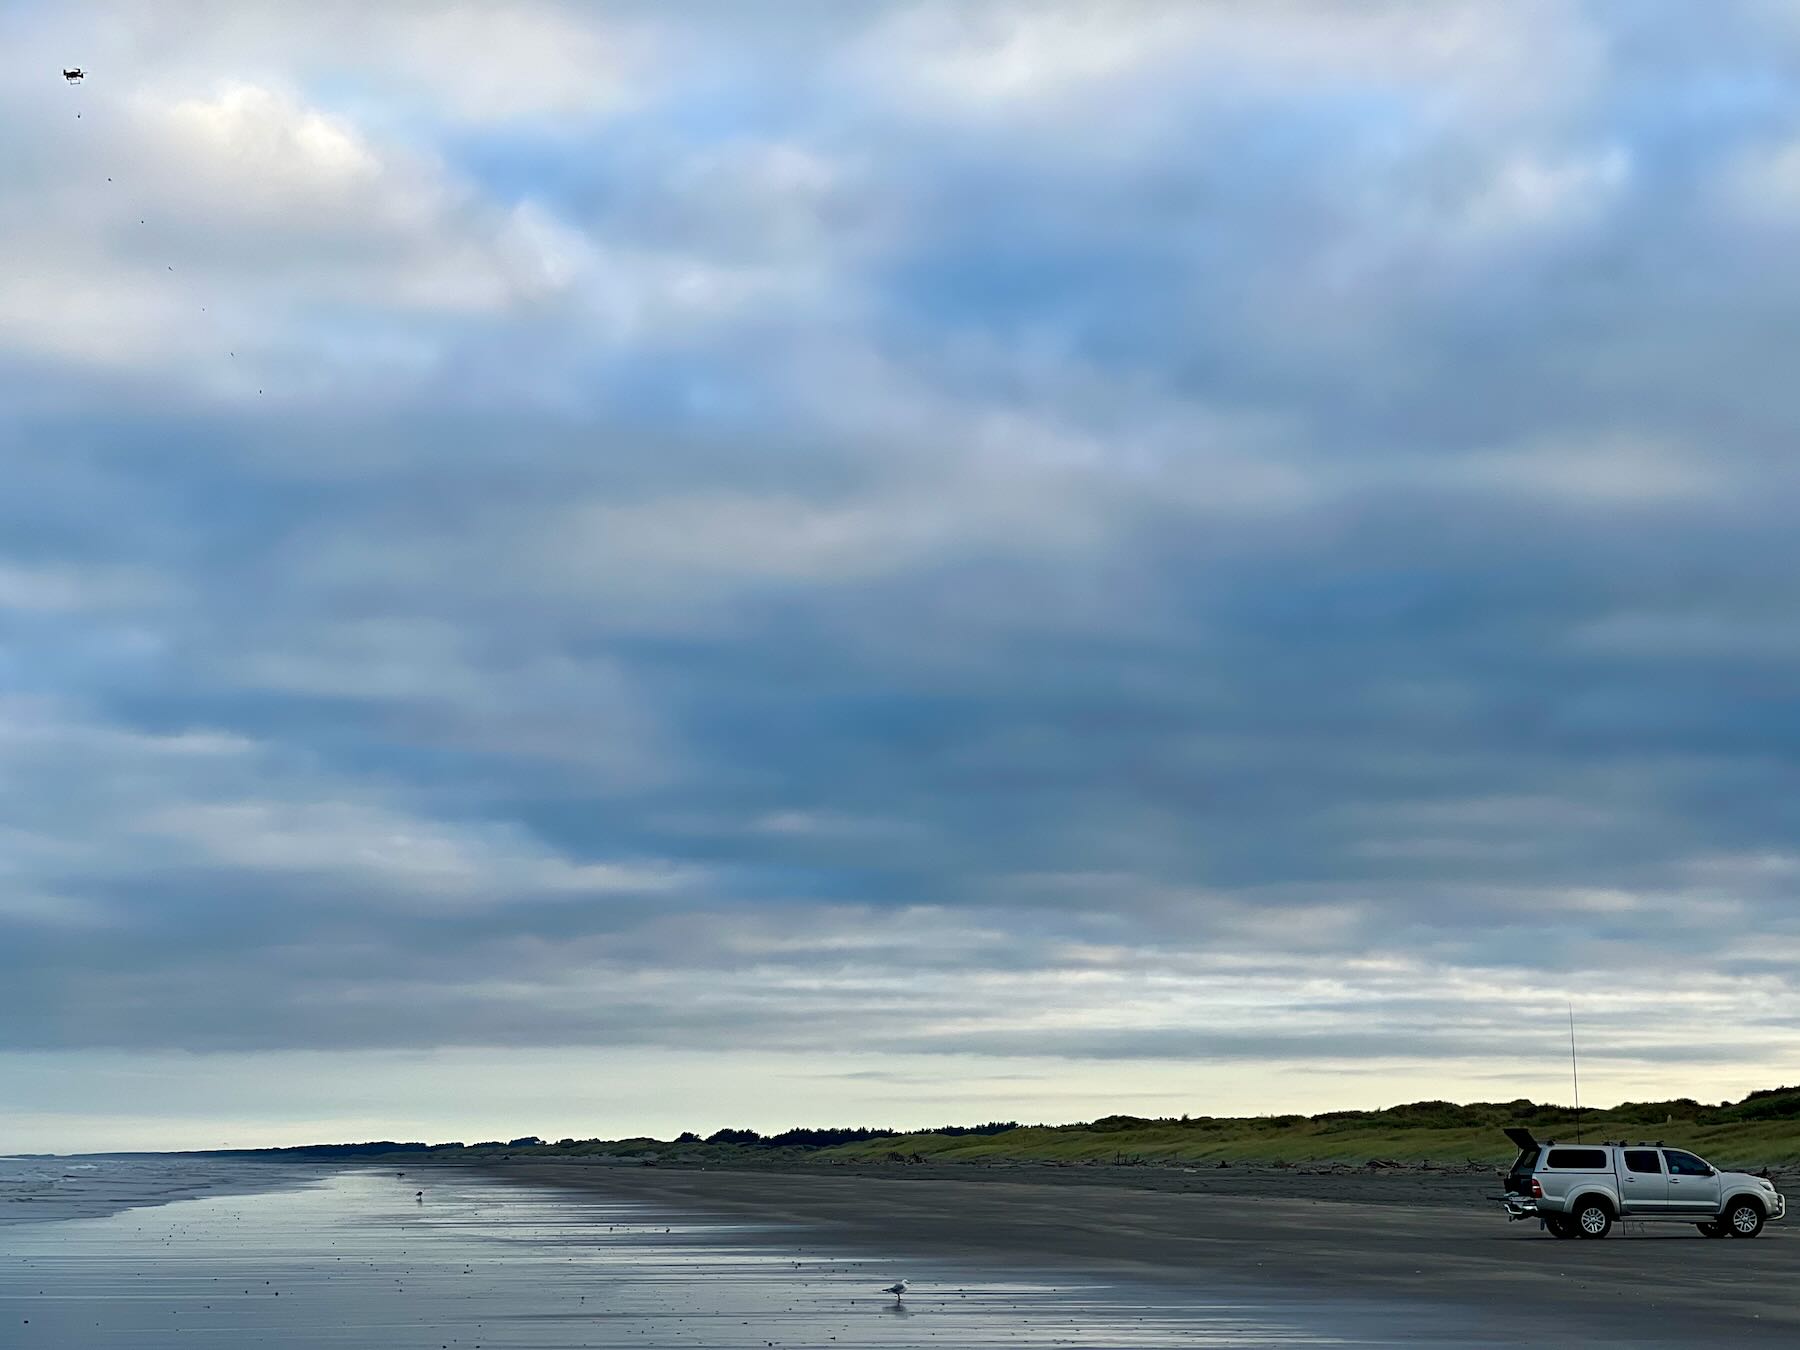 Vehicle on the beach with upright rods beside it and a drone at top left of the photo. 